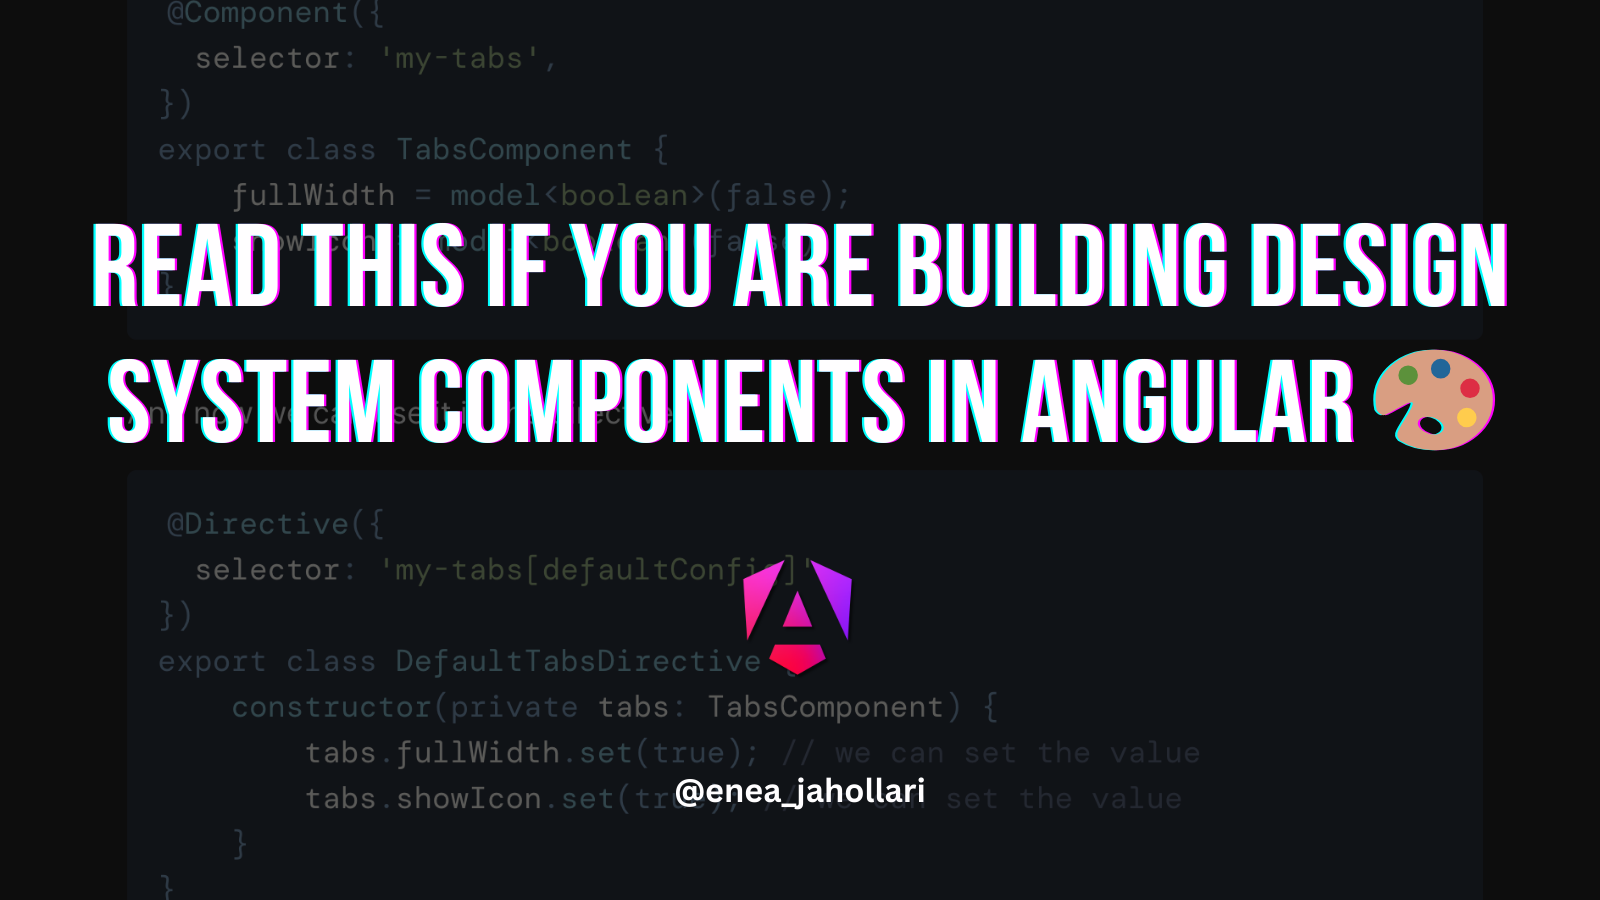 Read this if you are building design system components in Angular 🎨